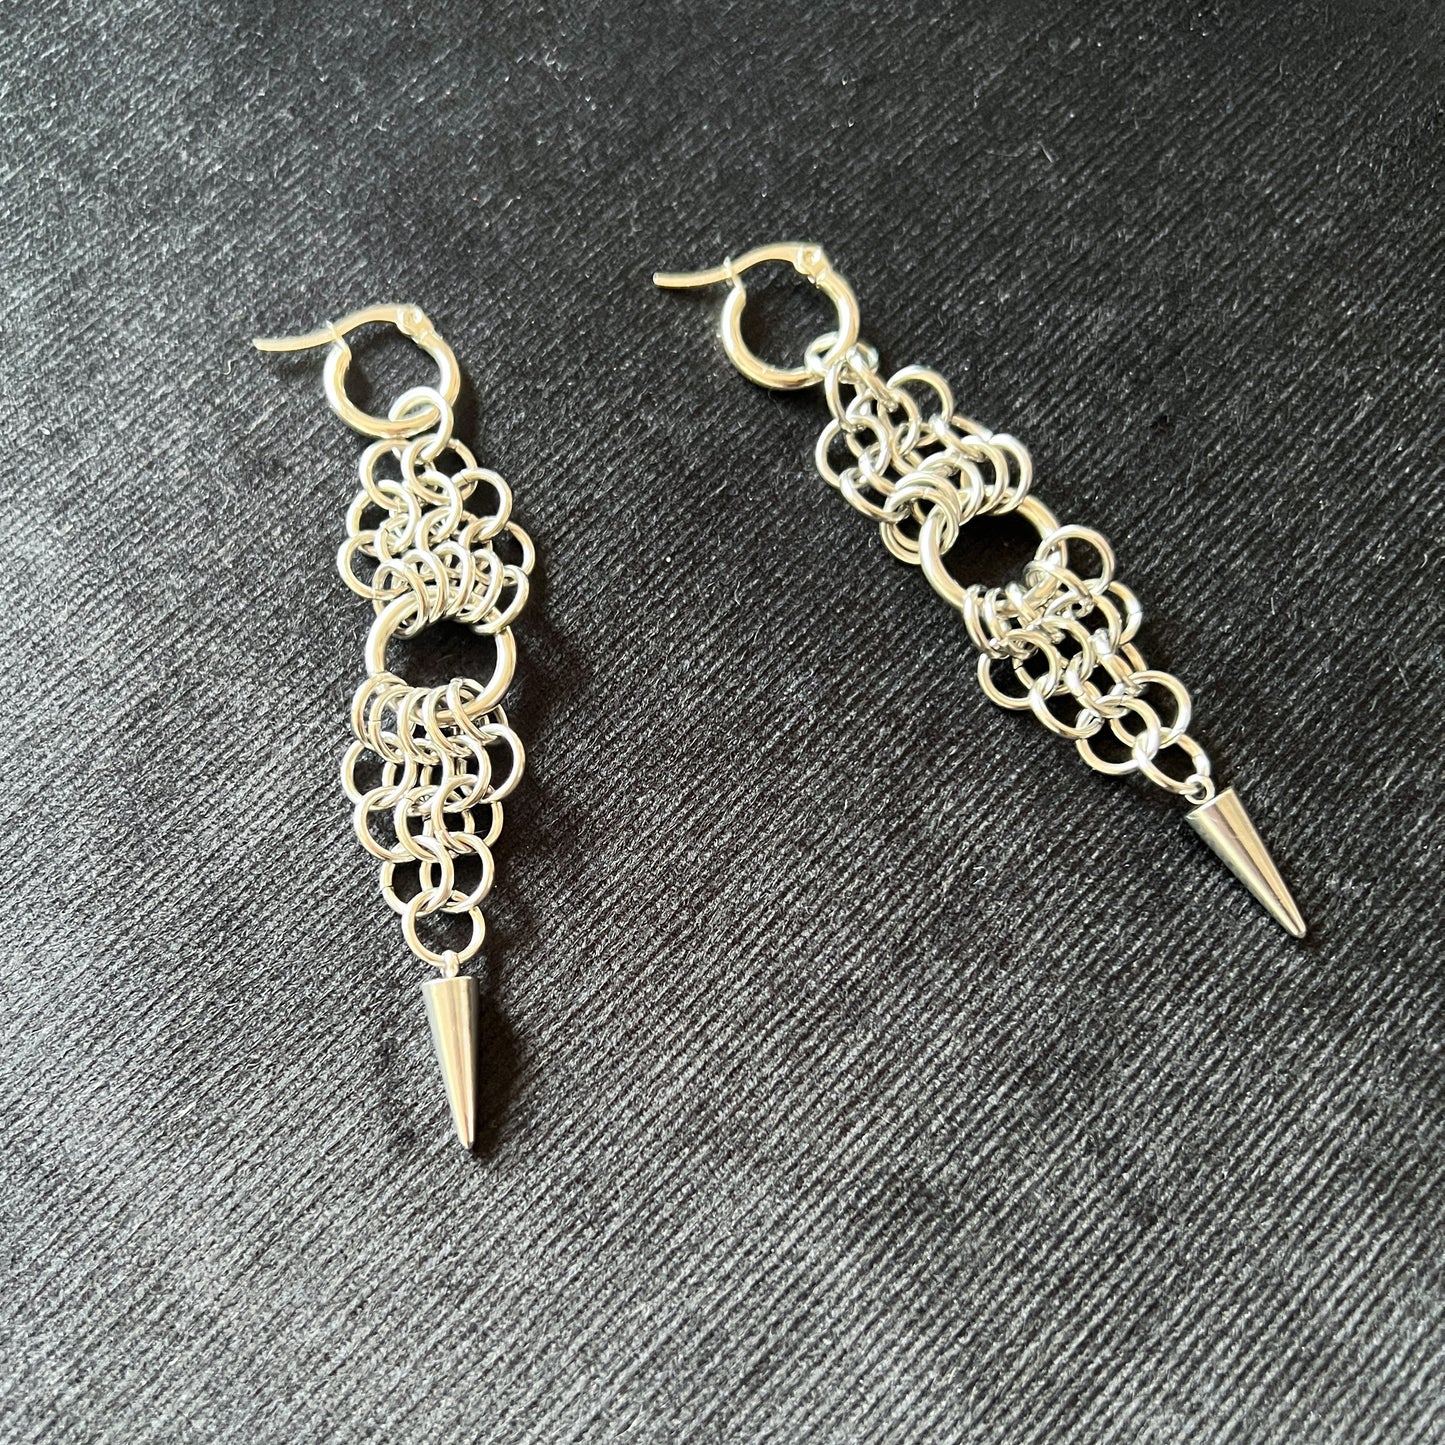 European 4 in 1 chainmail earrings made of stainless steel Baguette Magick